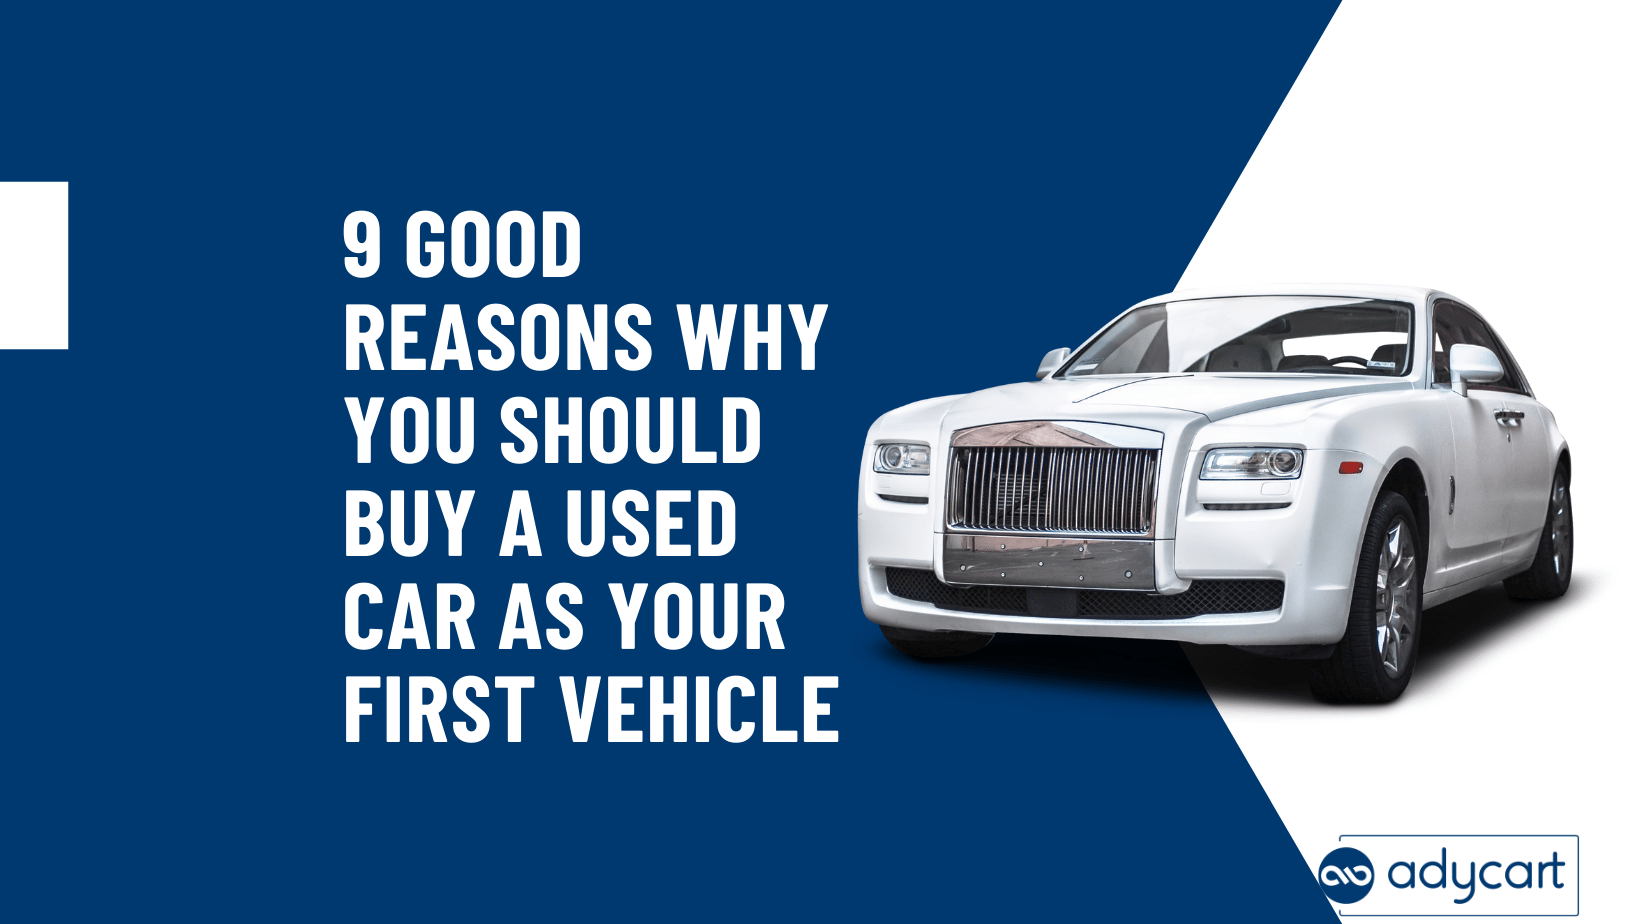 9 Good Reasons Why You Should Buy A Used Car As Your First Vehicle